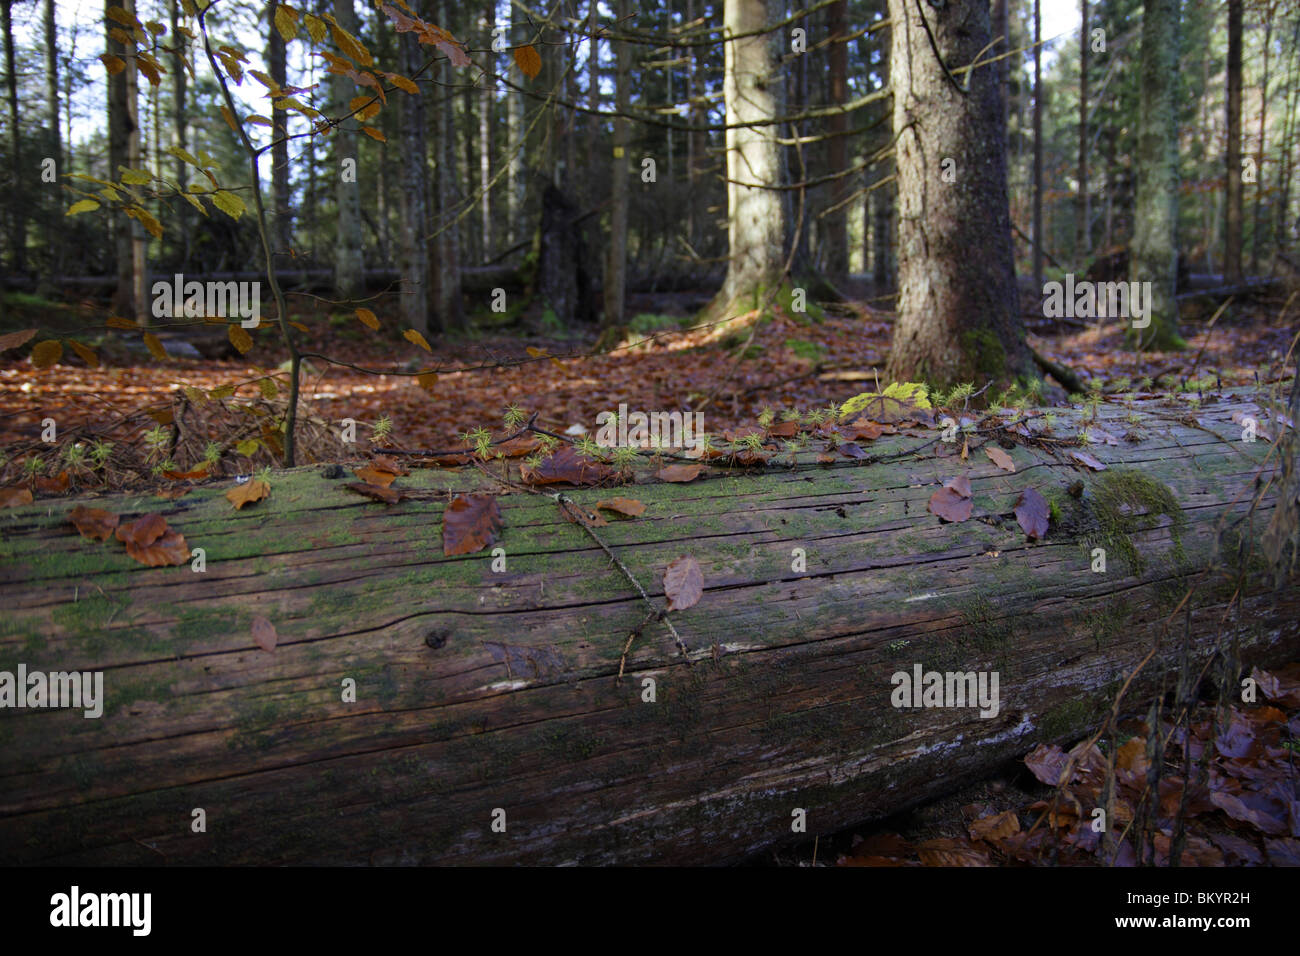 young spruce trees, Stock Photo